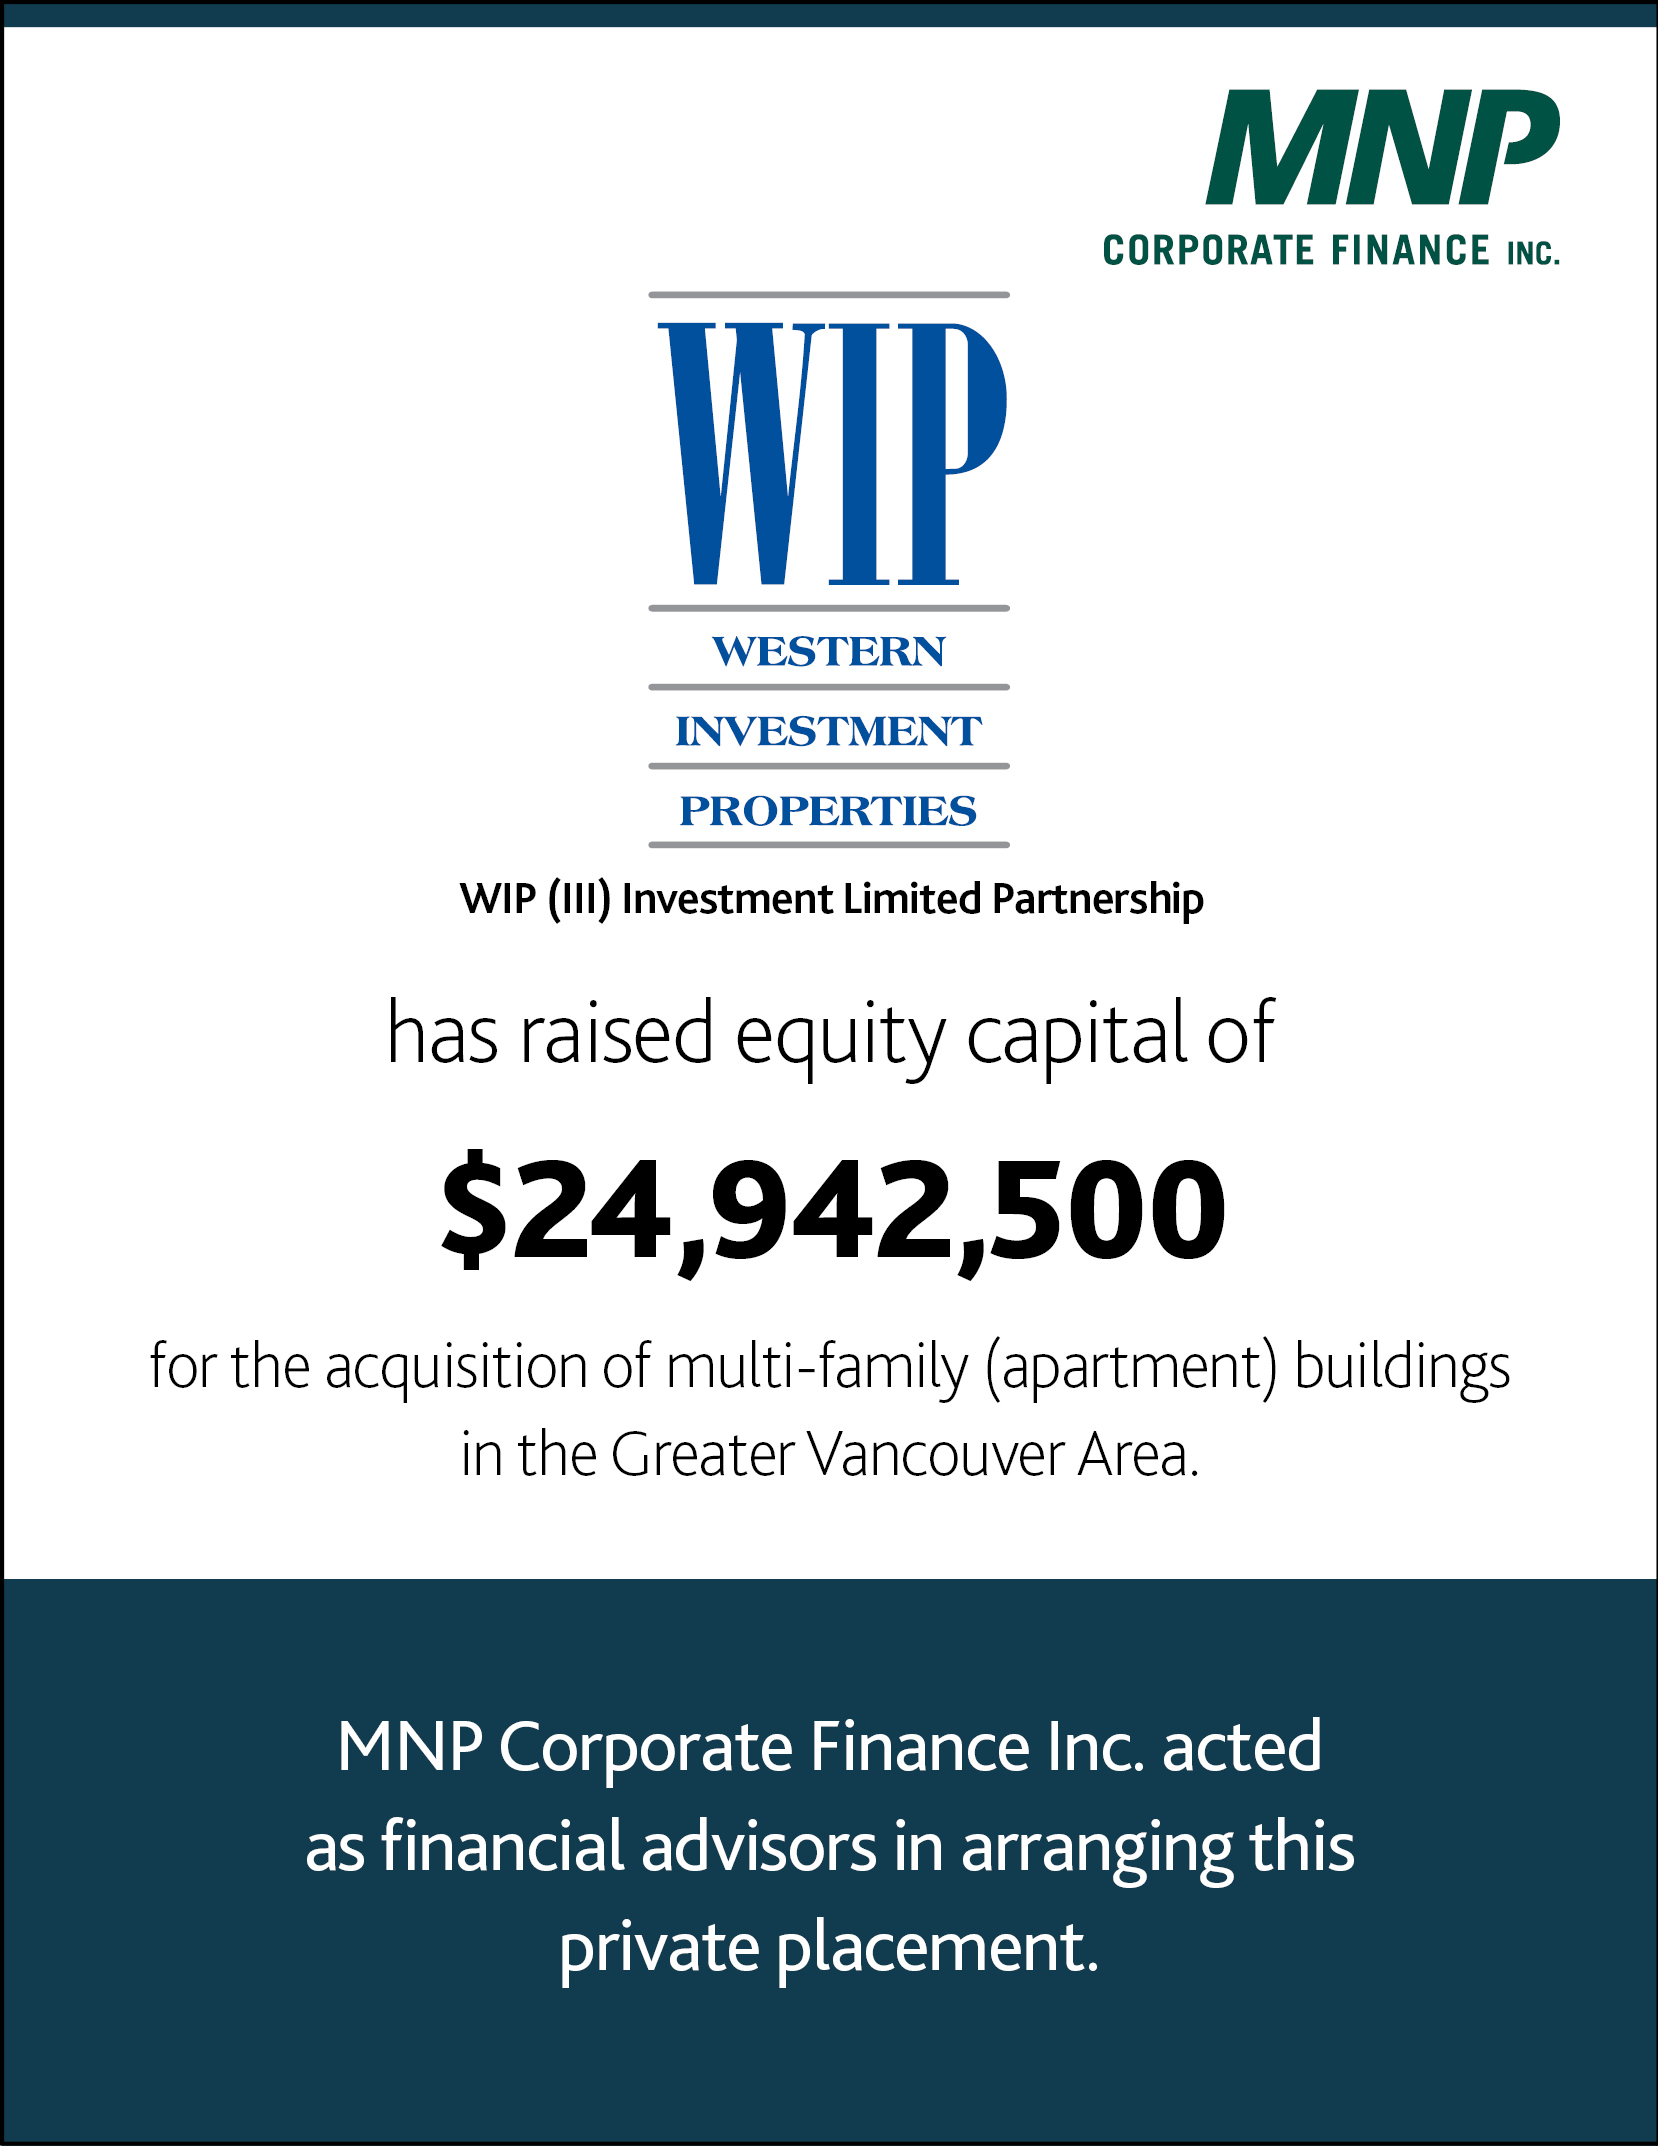 WIP (III) Investment LP has raised equity capital of $24,942,500 for the acquisition of multi-family (apartments) buildings in the Greater Vancouver Area.